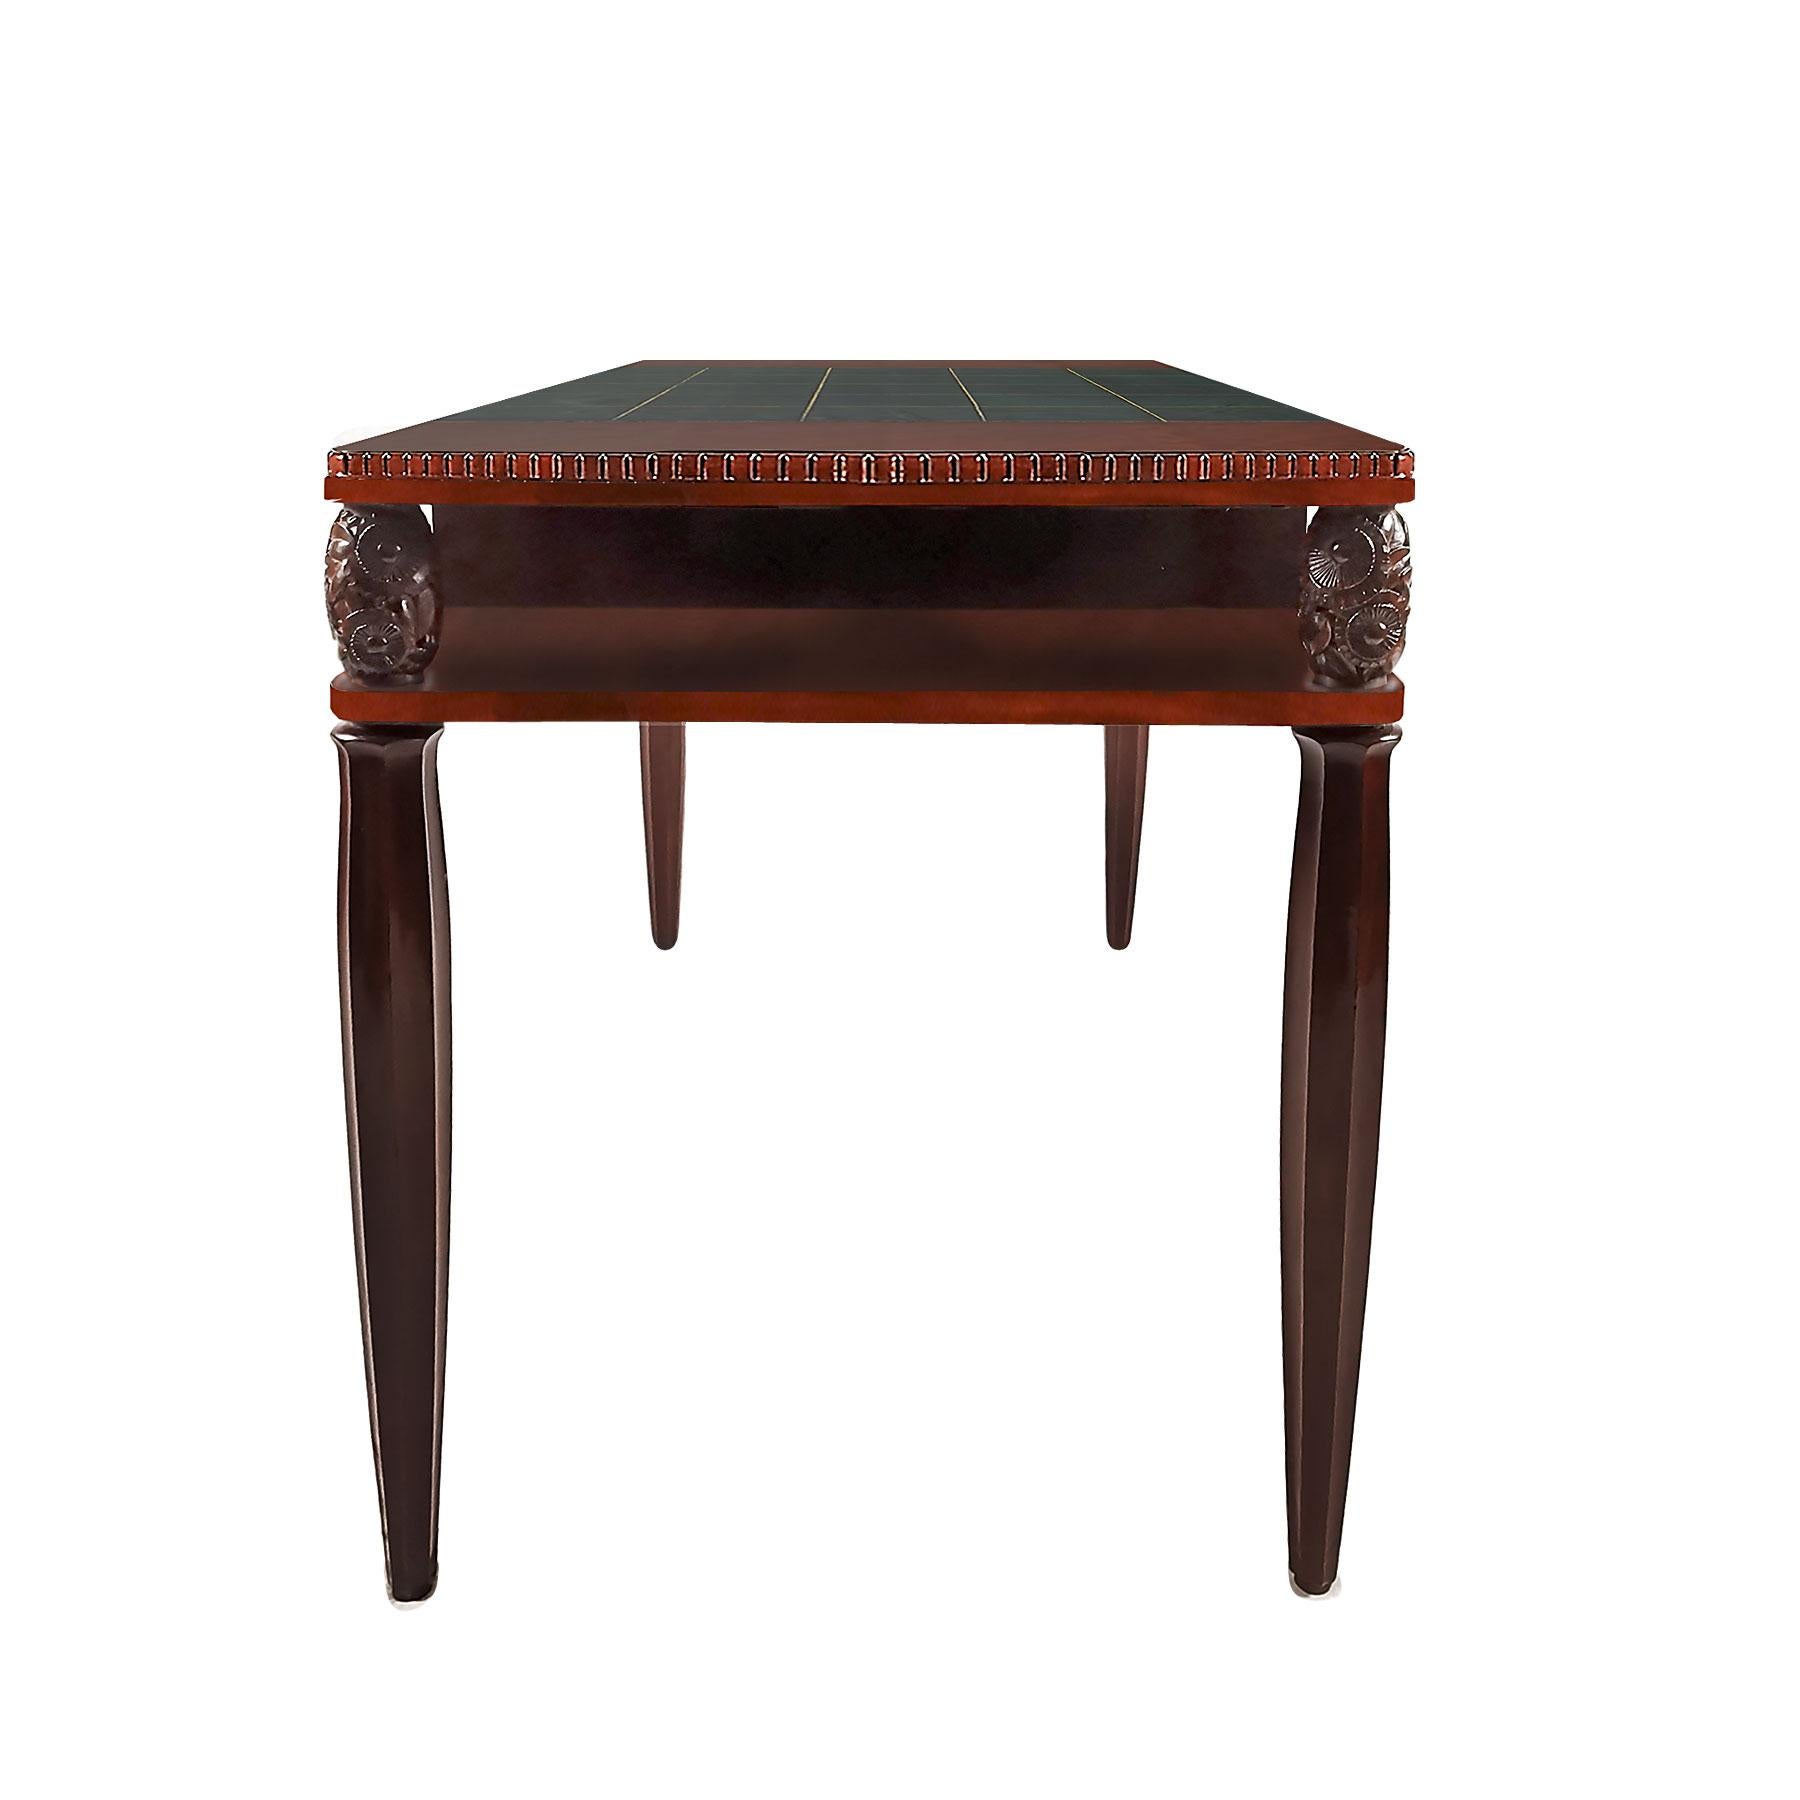 French 1925 Art Deco Lady Desk in the Style of Paul Follot, Mahogany, France